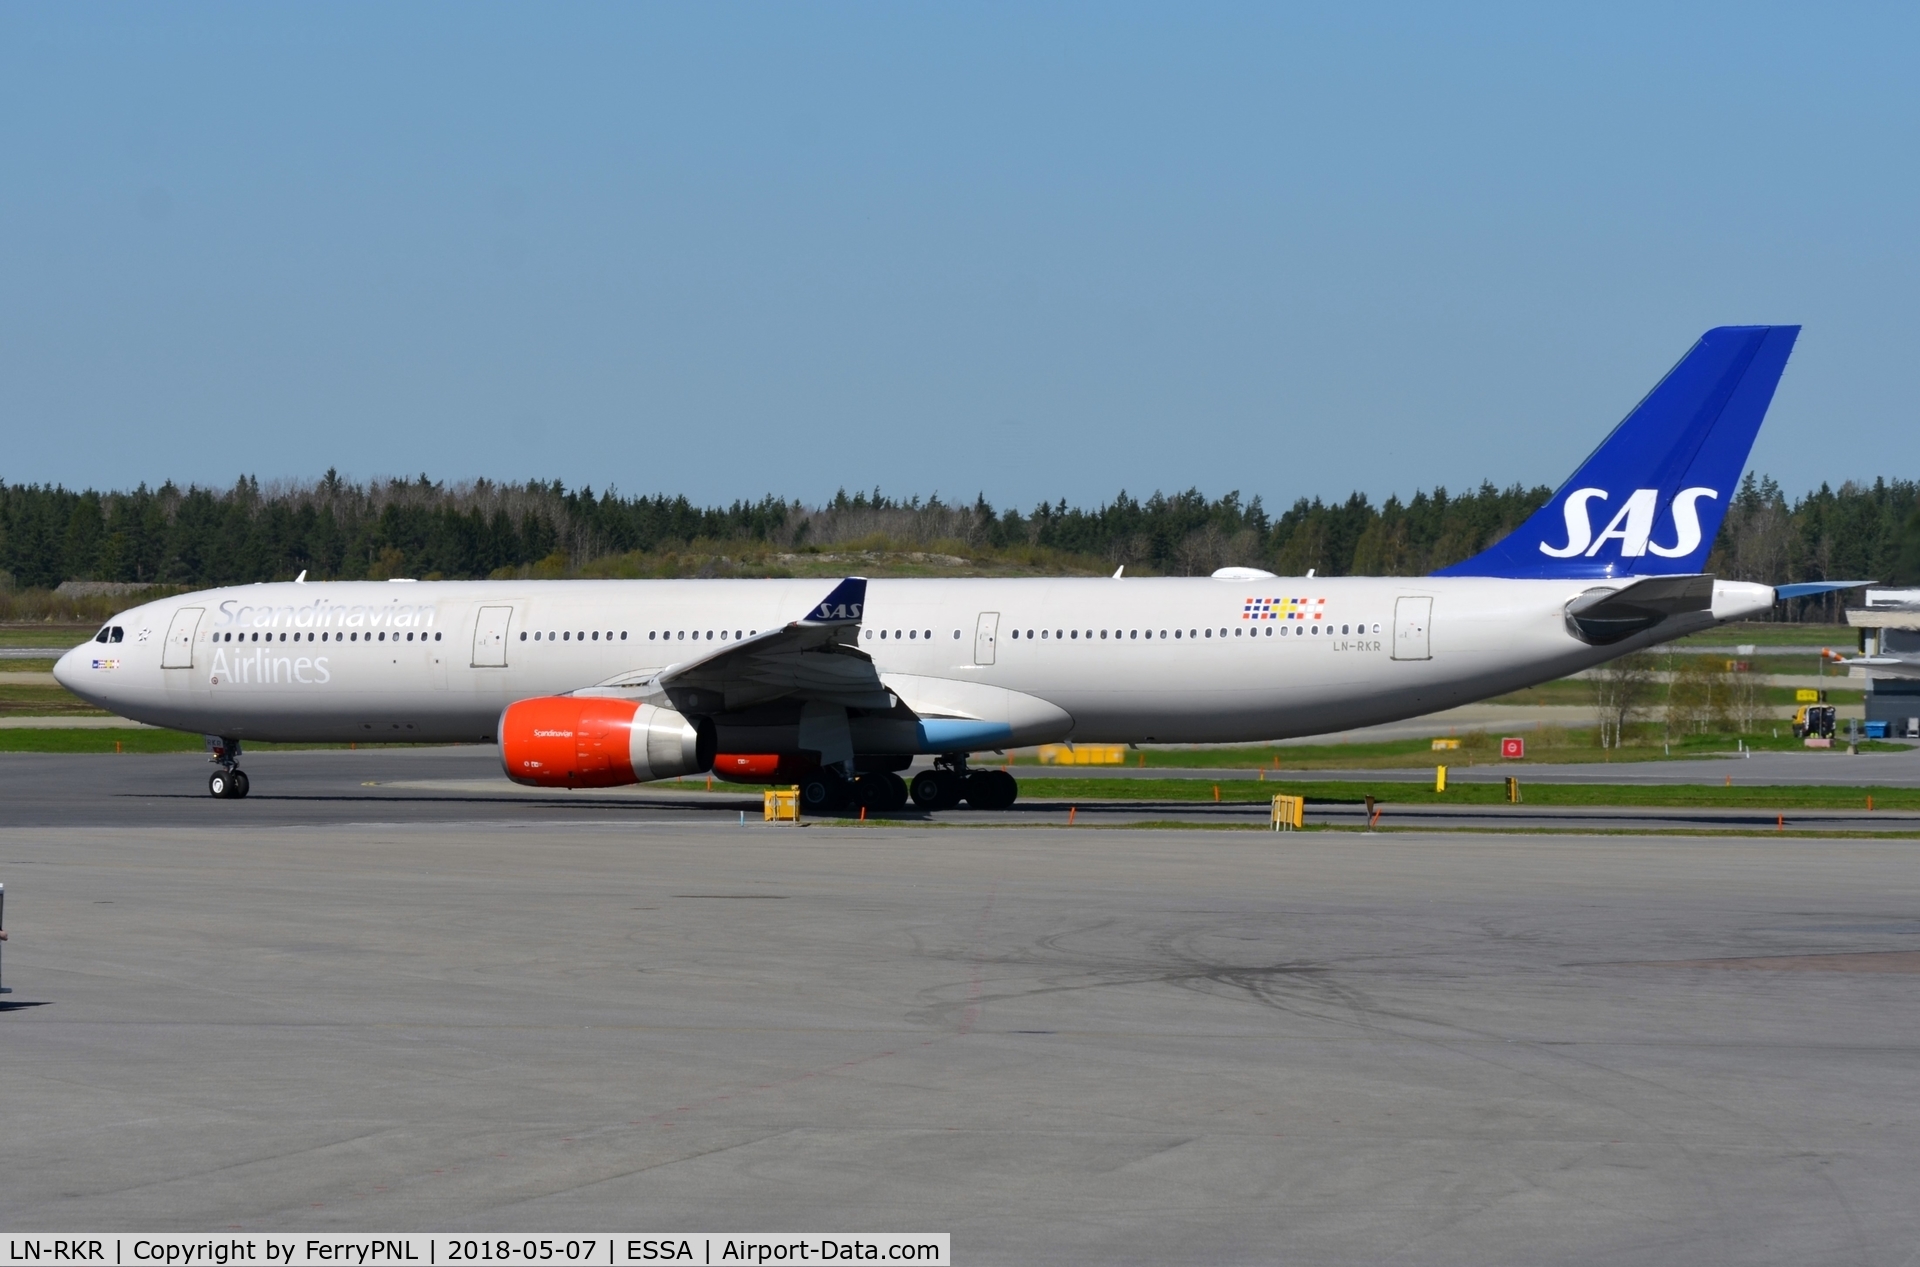 LN-RKR, 2015 Airbus A330-343E C/N 1660, SAS A333 taxying to the runway